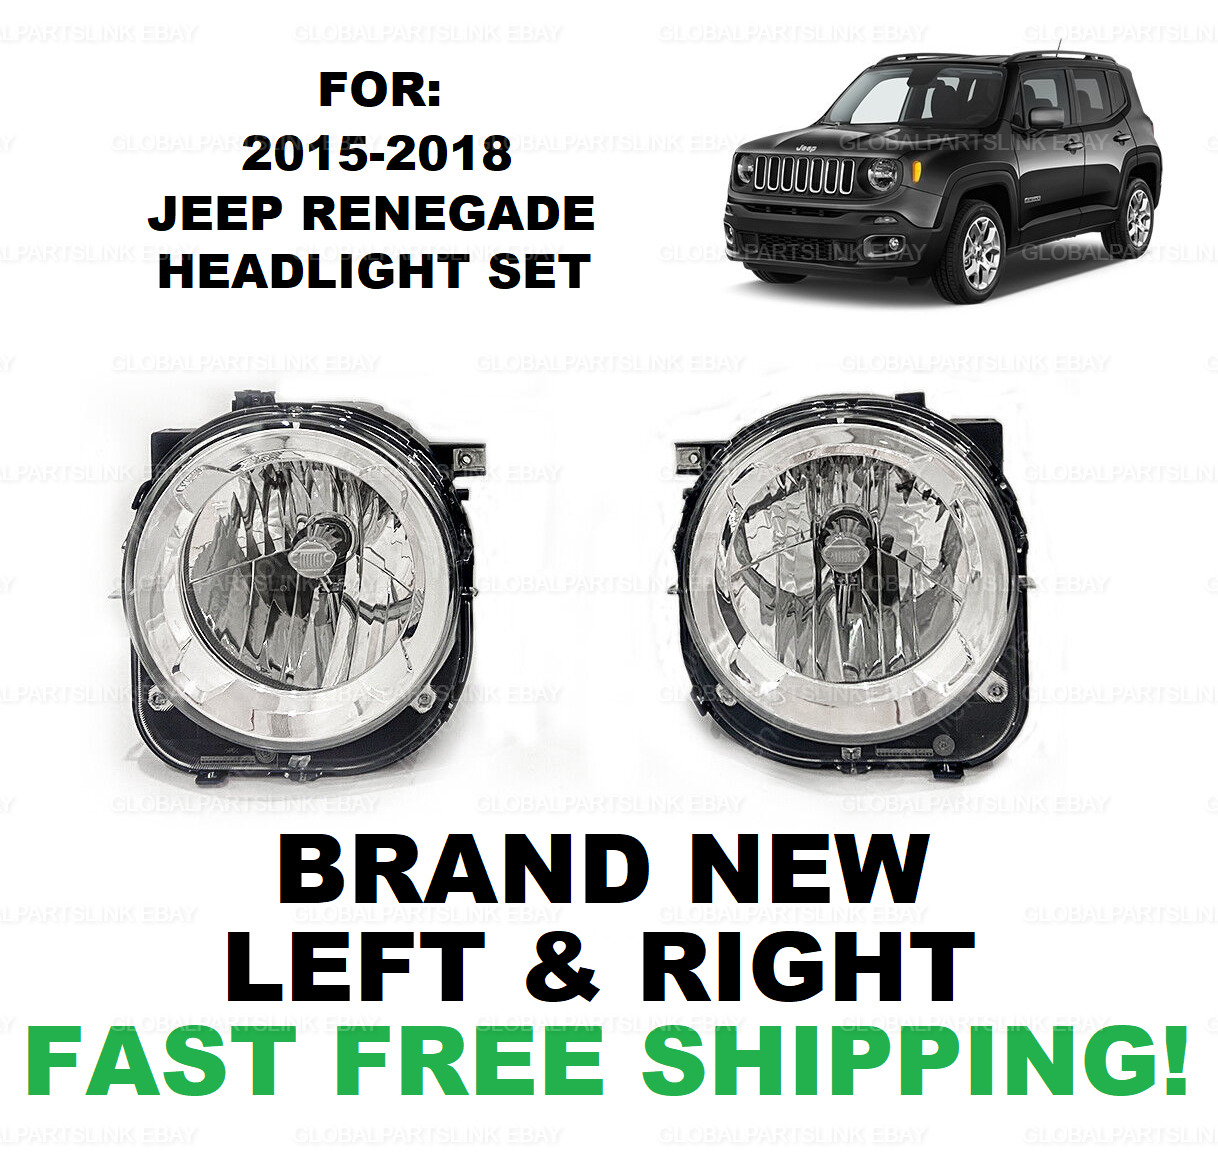 FOR 2015-2018 Jeep Renegade  Headlights Headlamps LEFT RIGHT